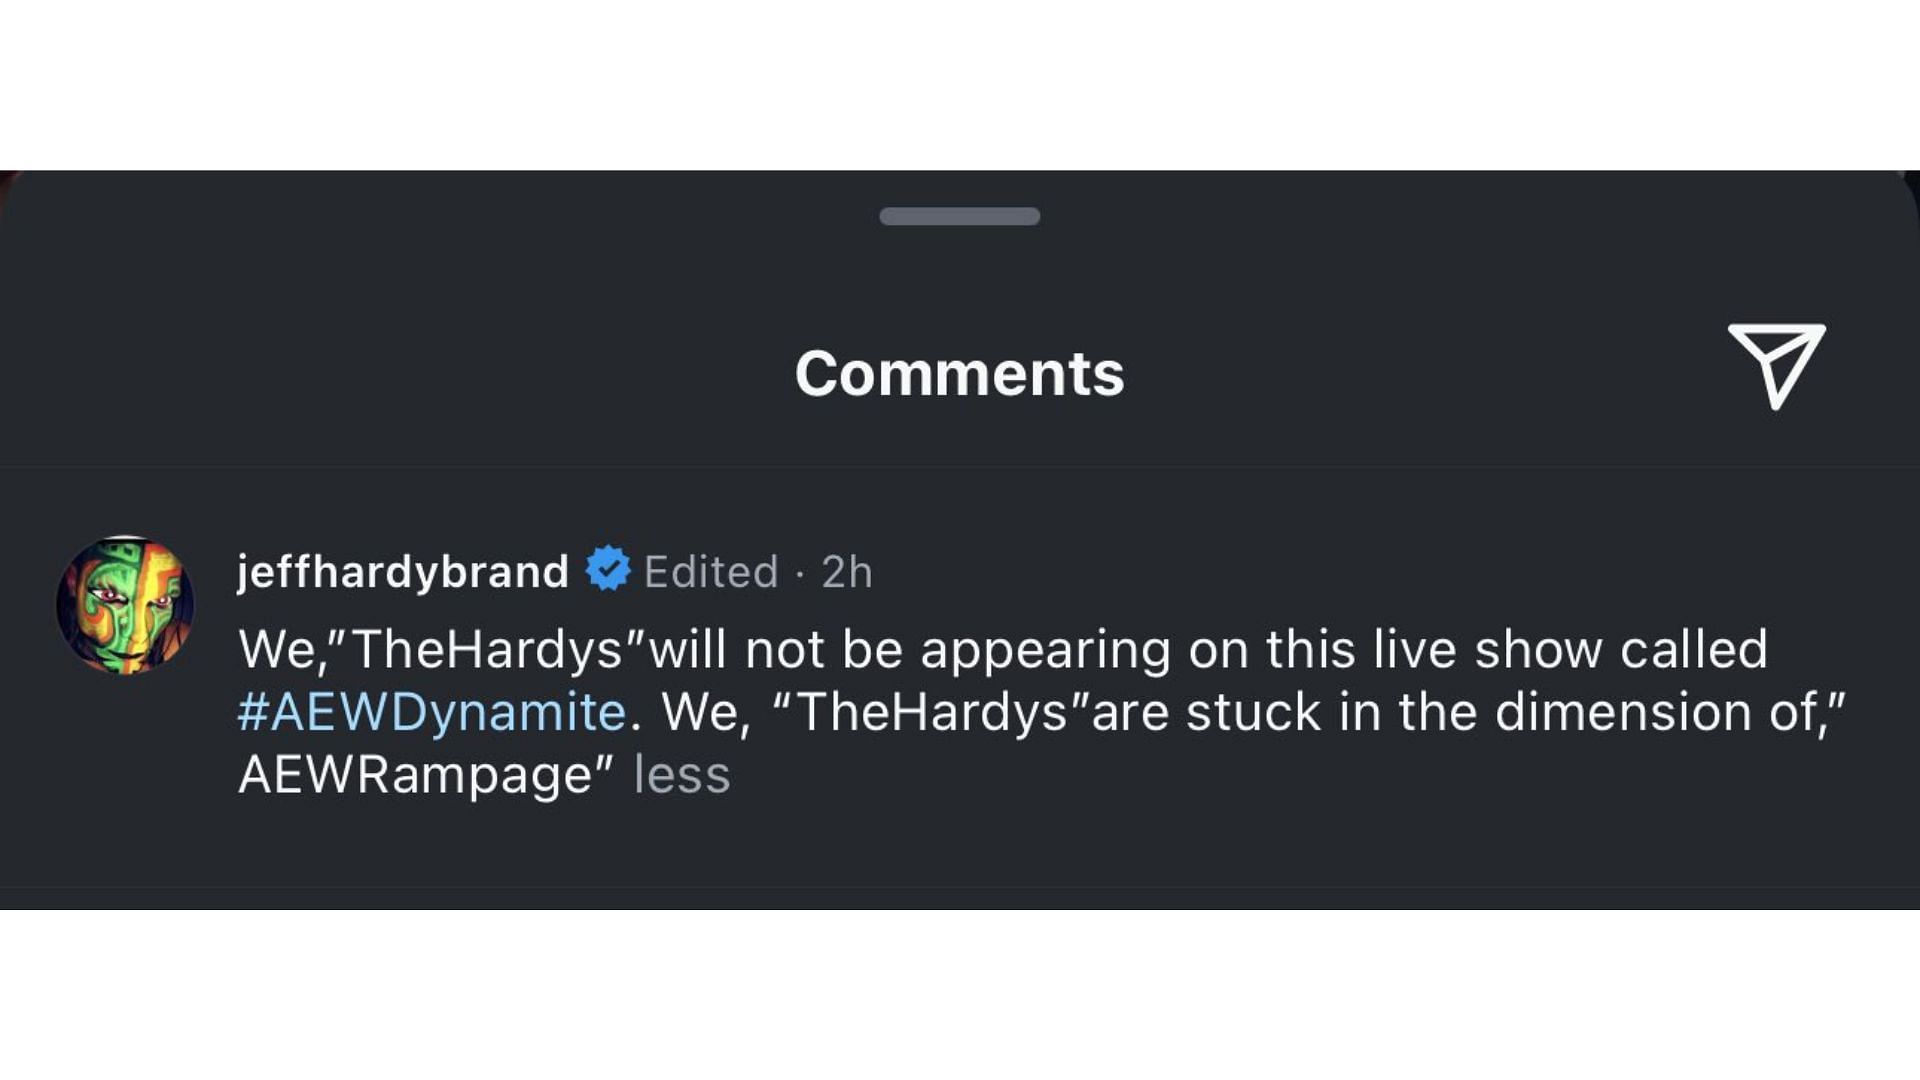 Jeff Hardy reveals the Hardys are stuck on Rampage and will not appear on Dynamite.